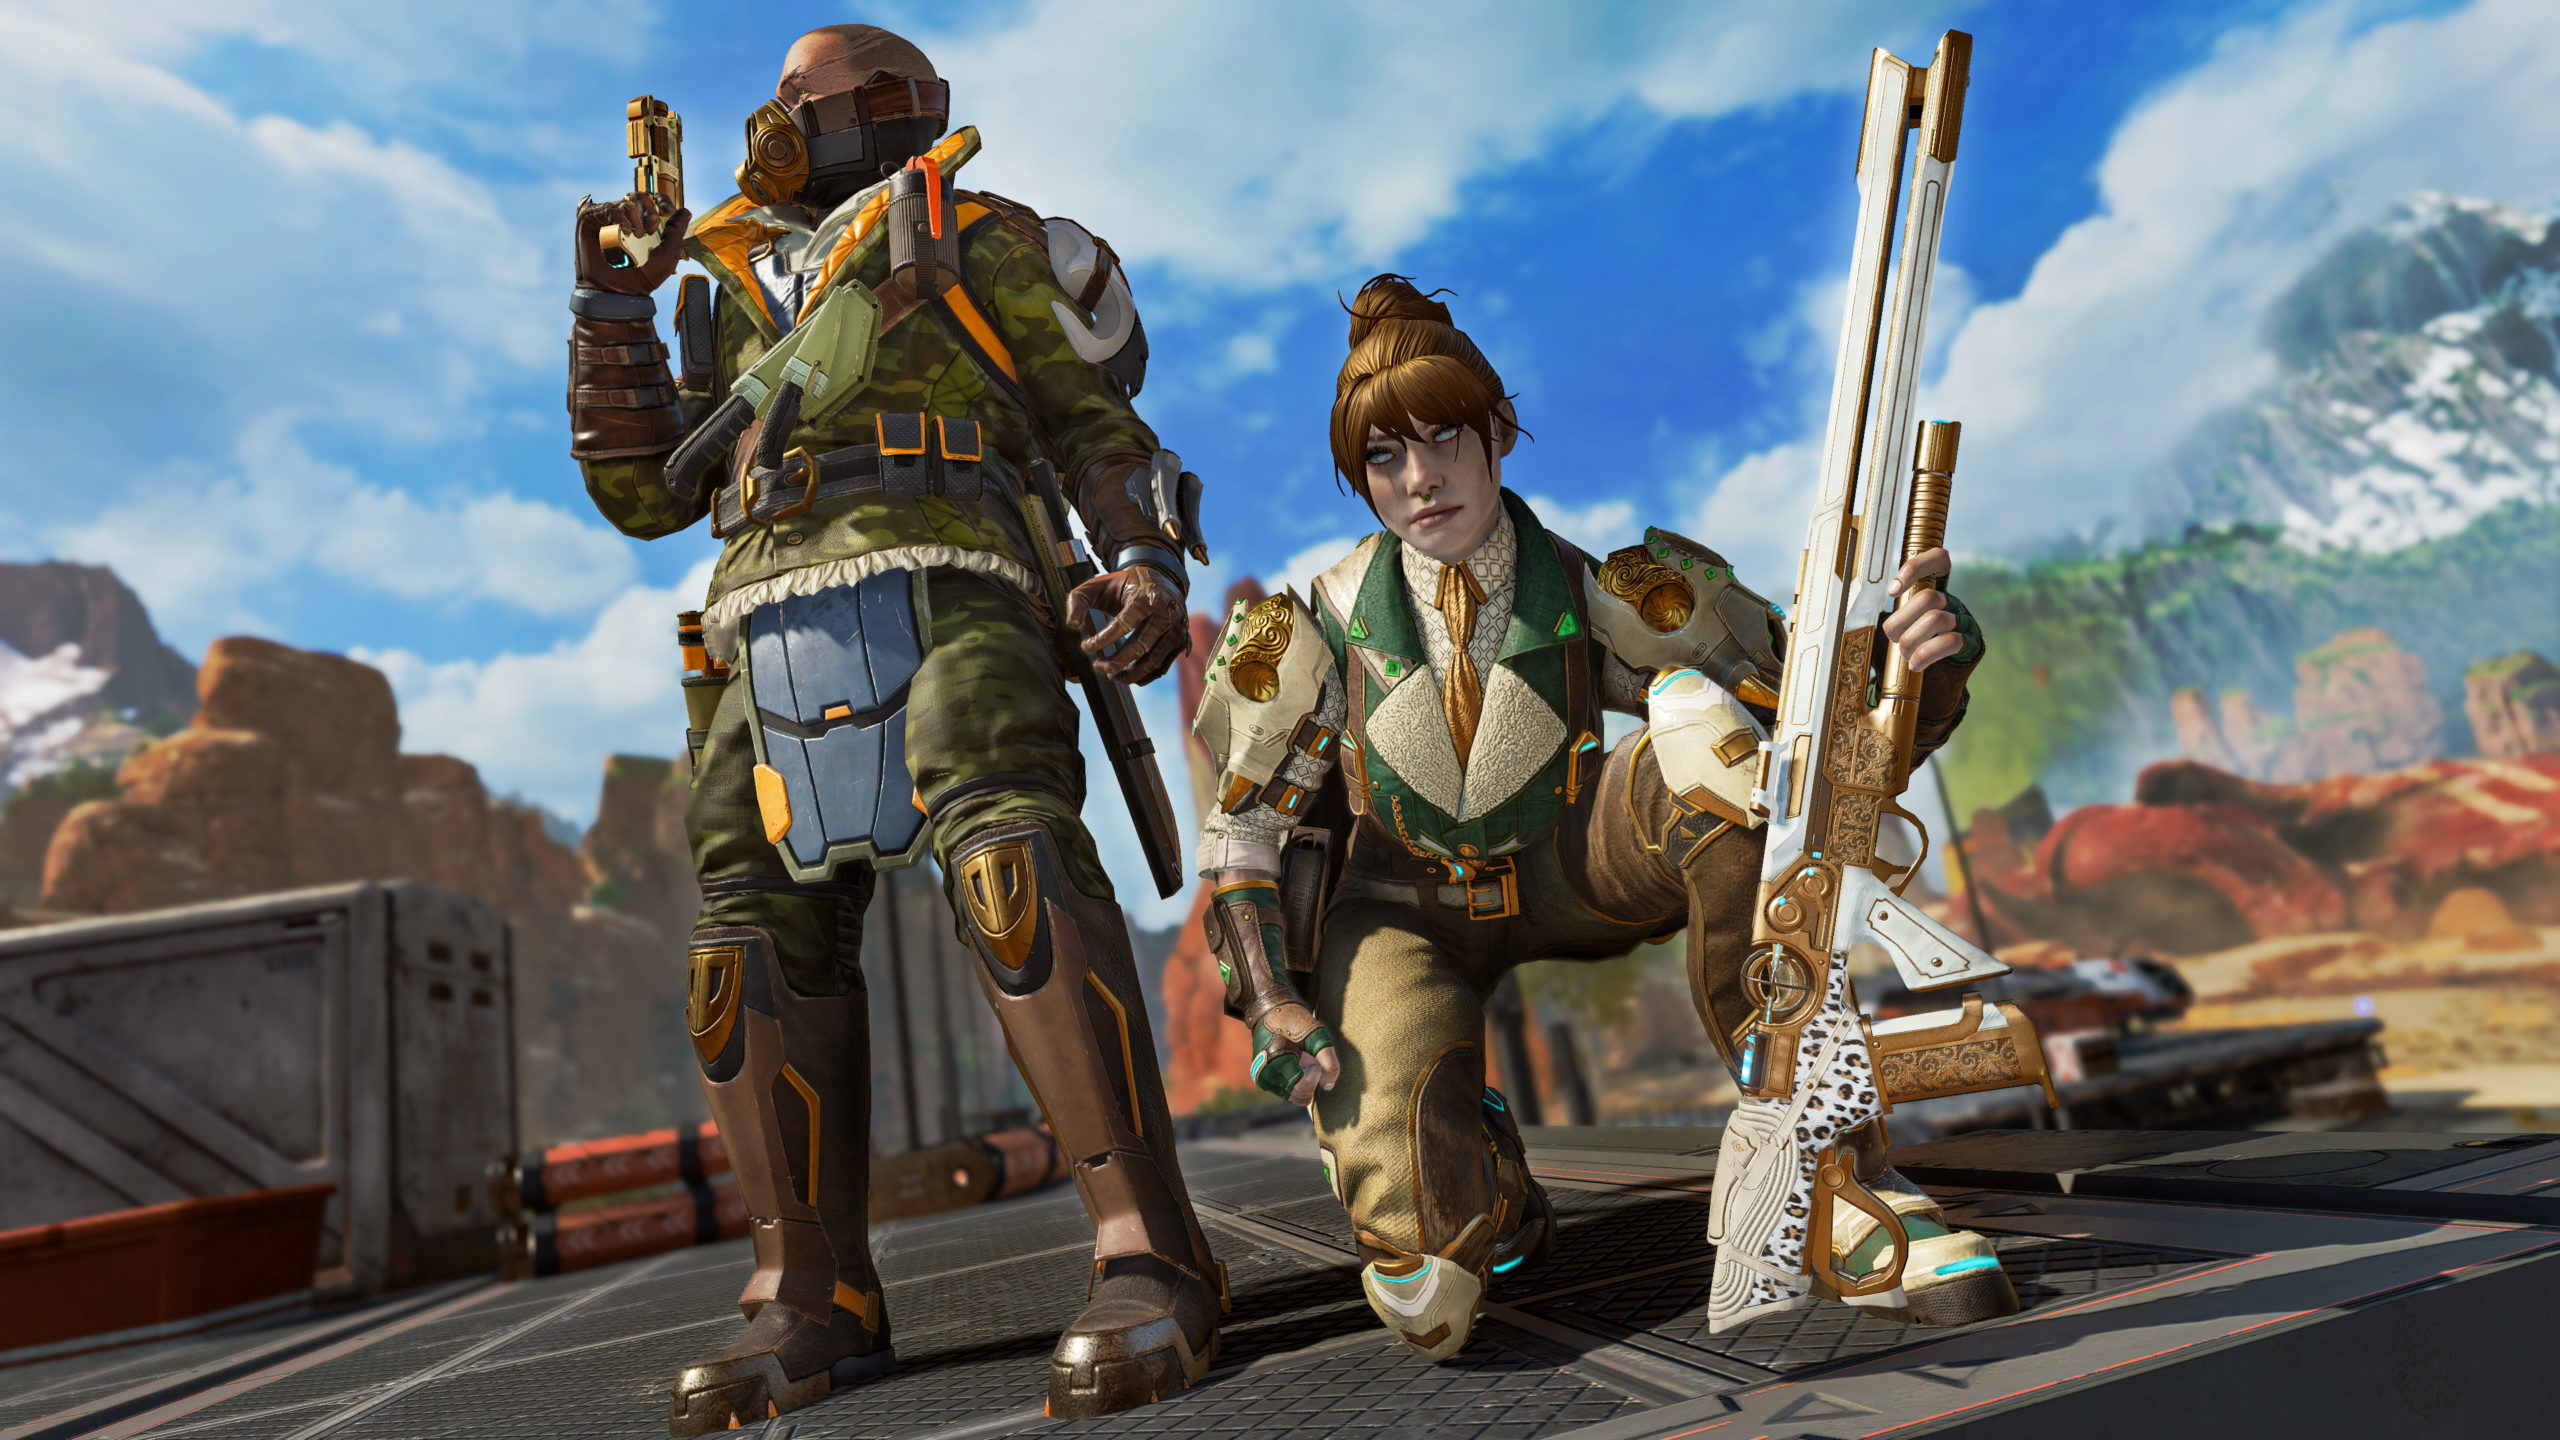 Caustic and Wraith wear brand-new battle pass skins.